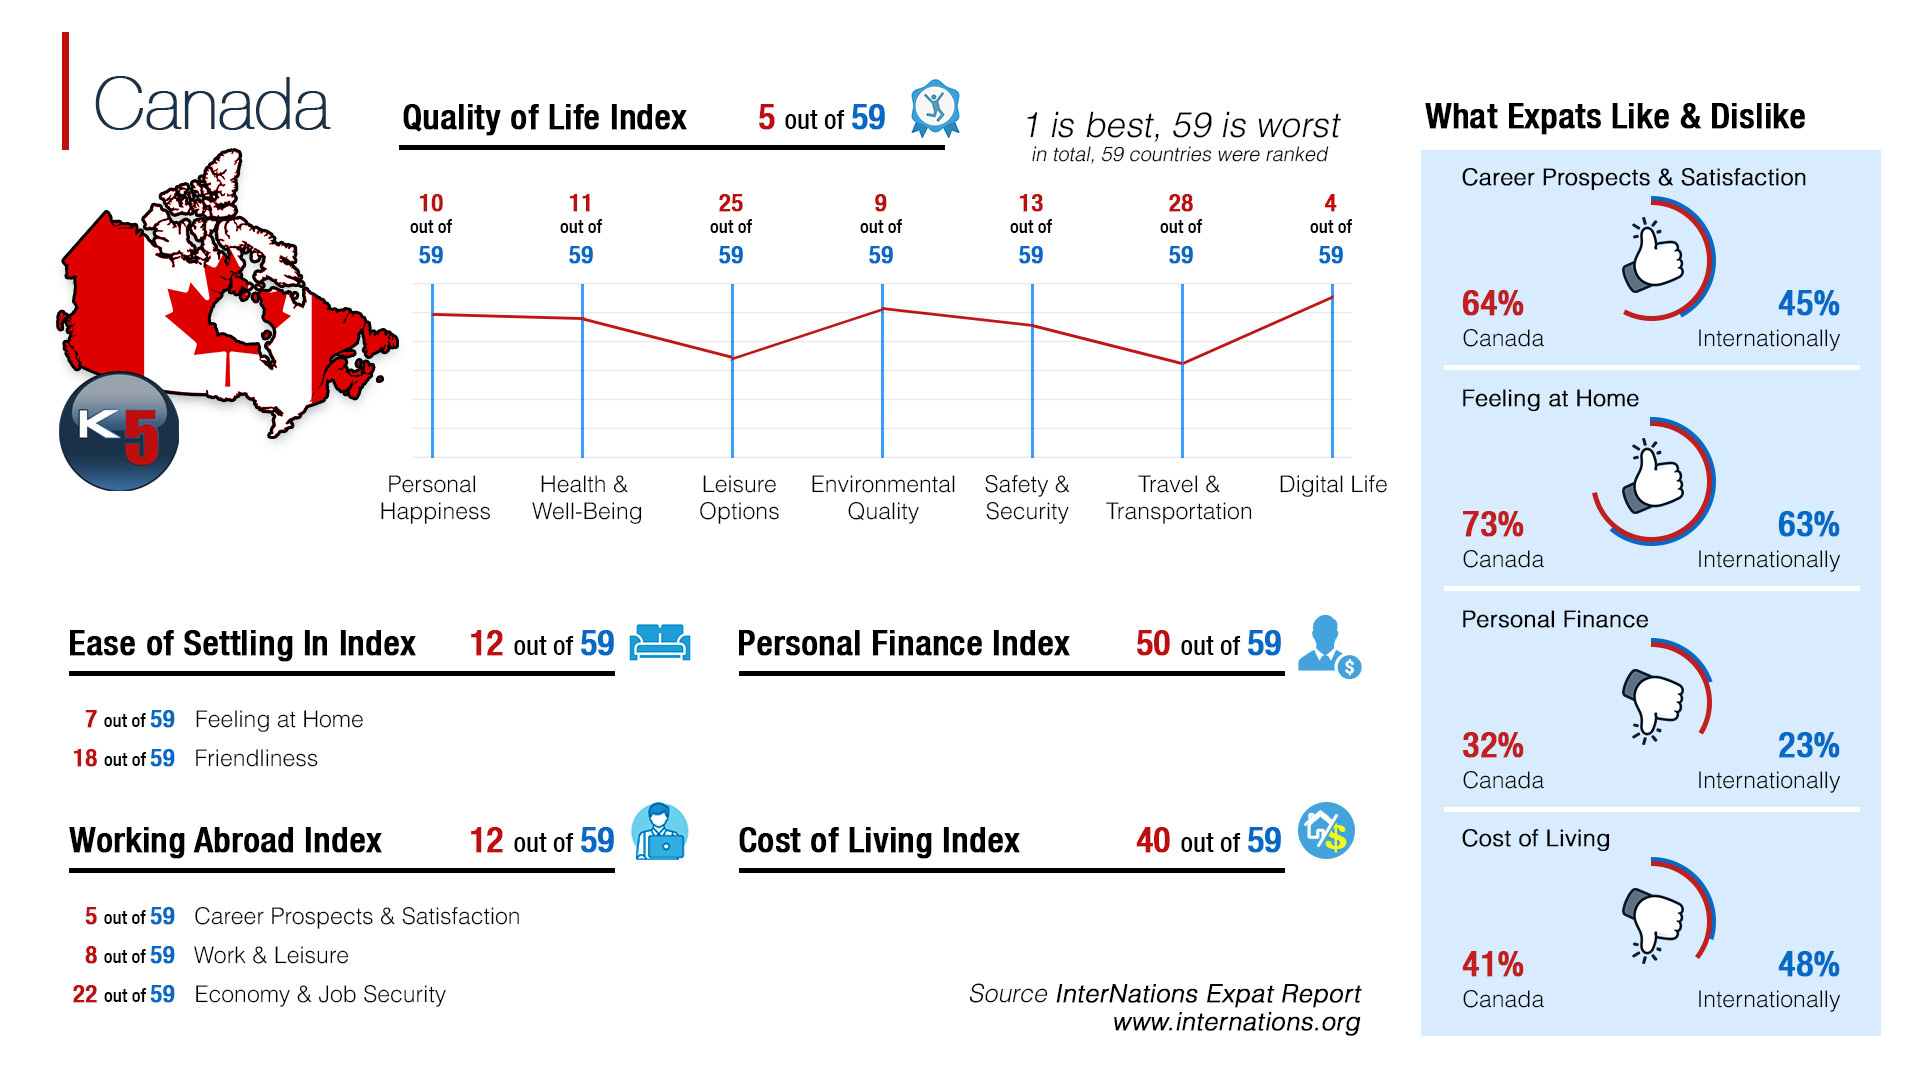 Quality of Life Index in Canada